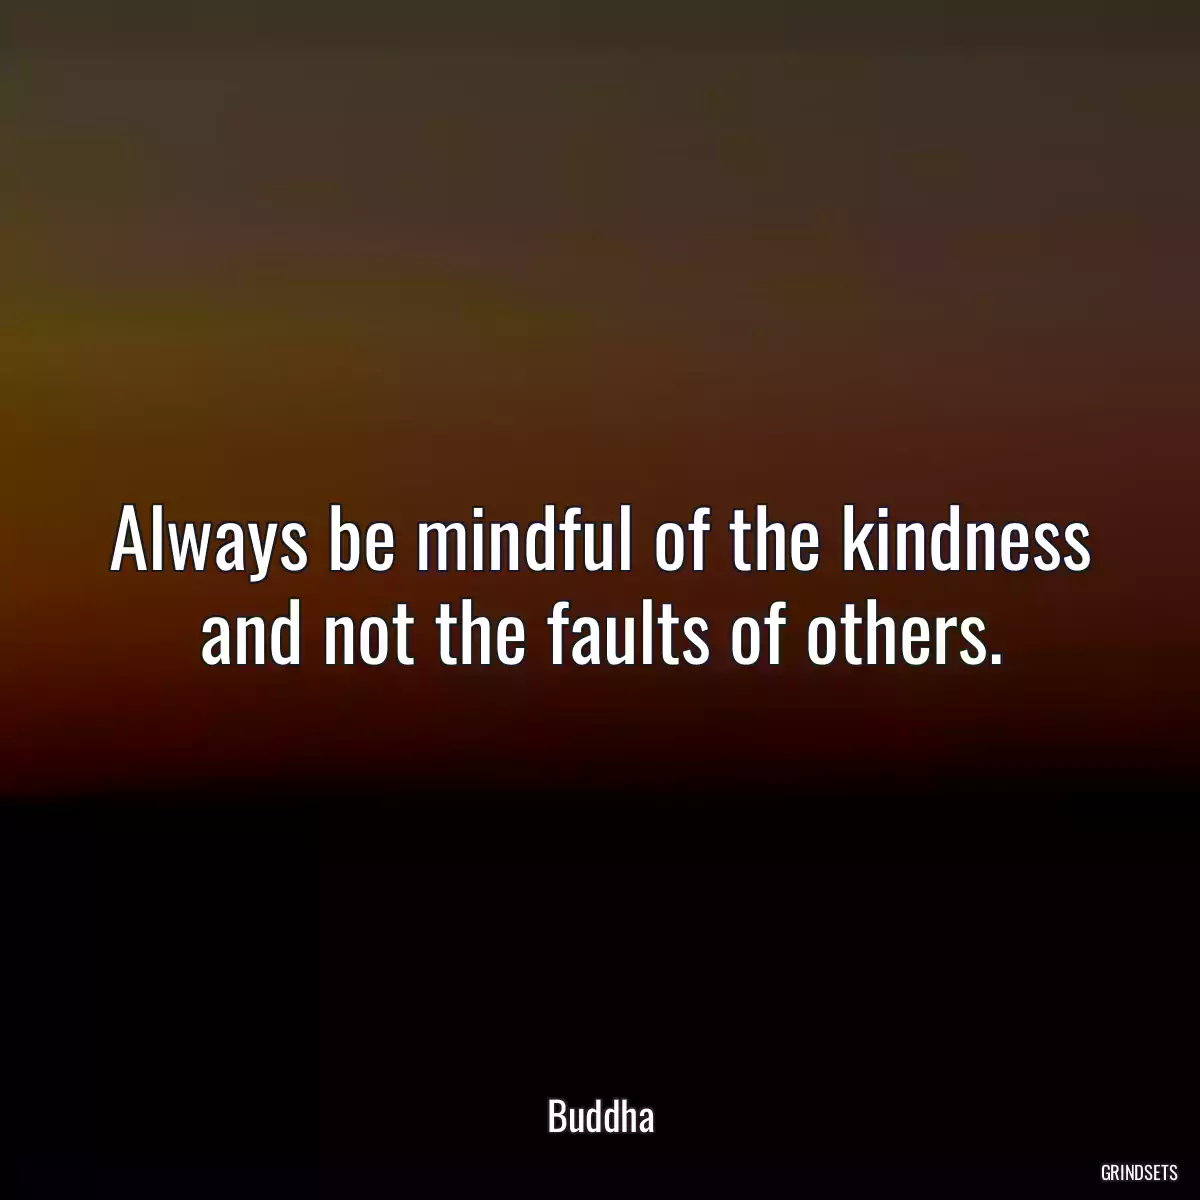 Always be mindful of the kindness and not the faults of others.